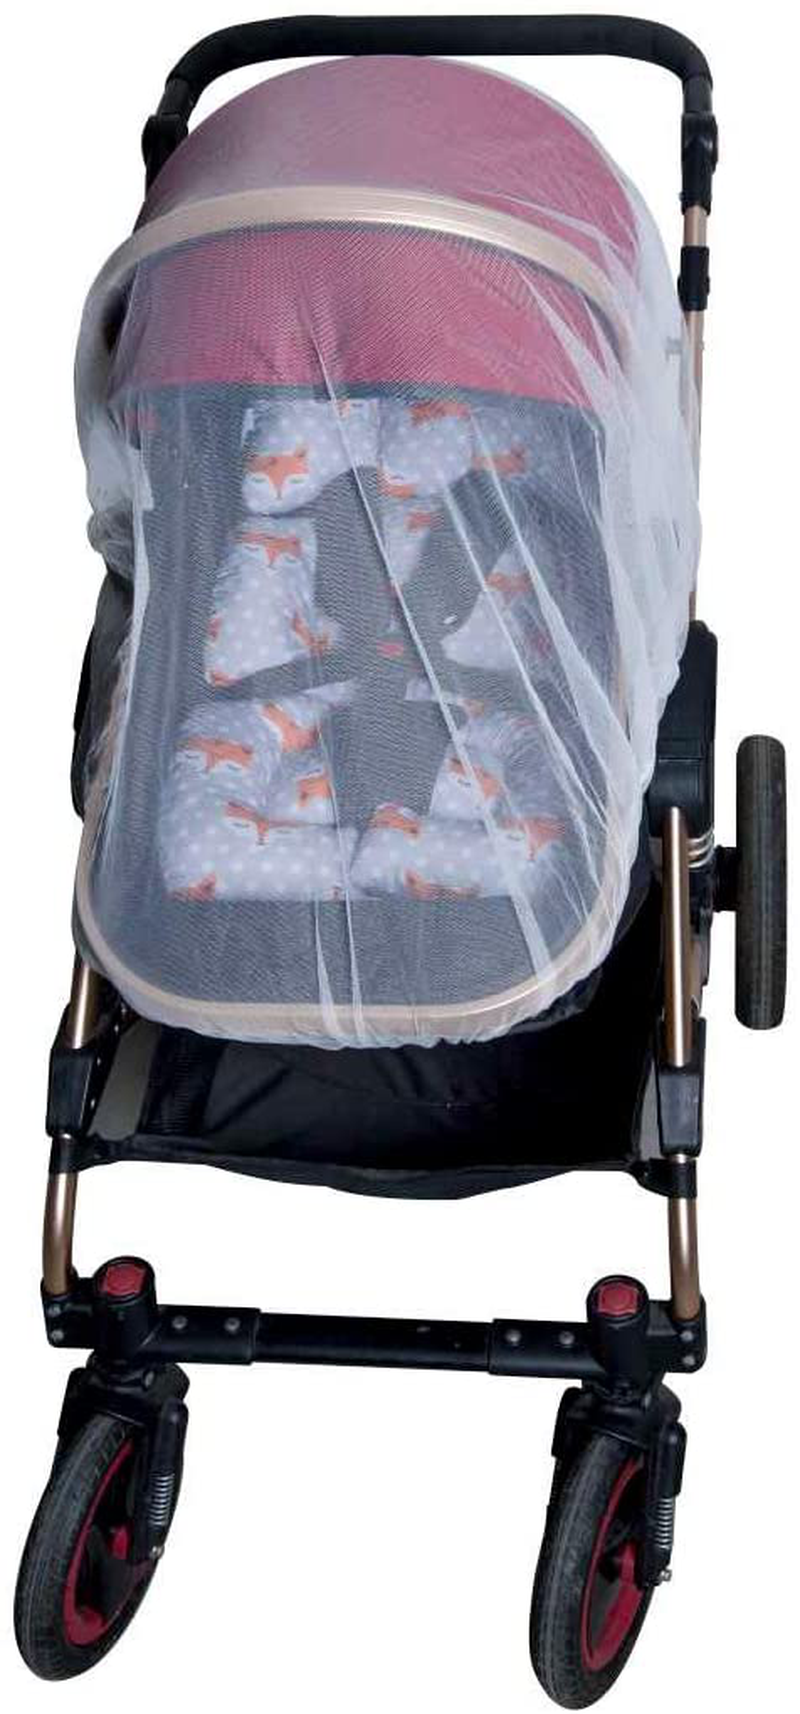 Enovoe Mosquito Net for Stroller - Durable Baby Stroller Mosquito Net - Perfect Bug Net for Strollers, Bassinets, Cradles, Playards, Pack N Plays and Portable Mini Crib(White)